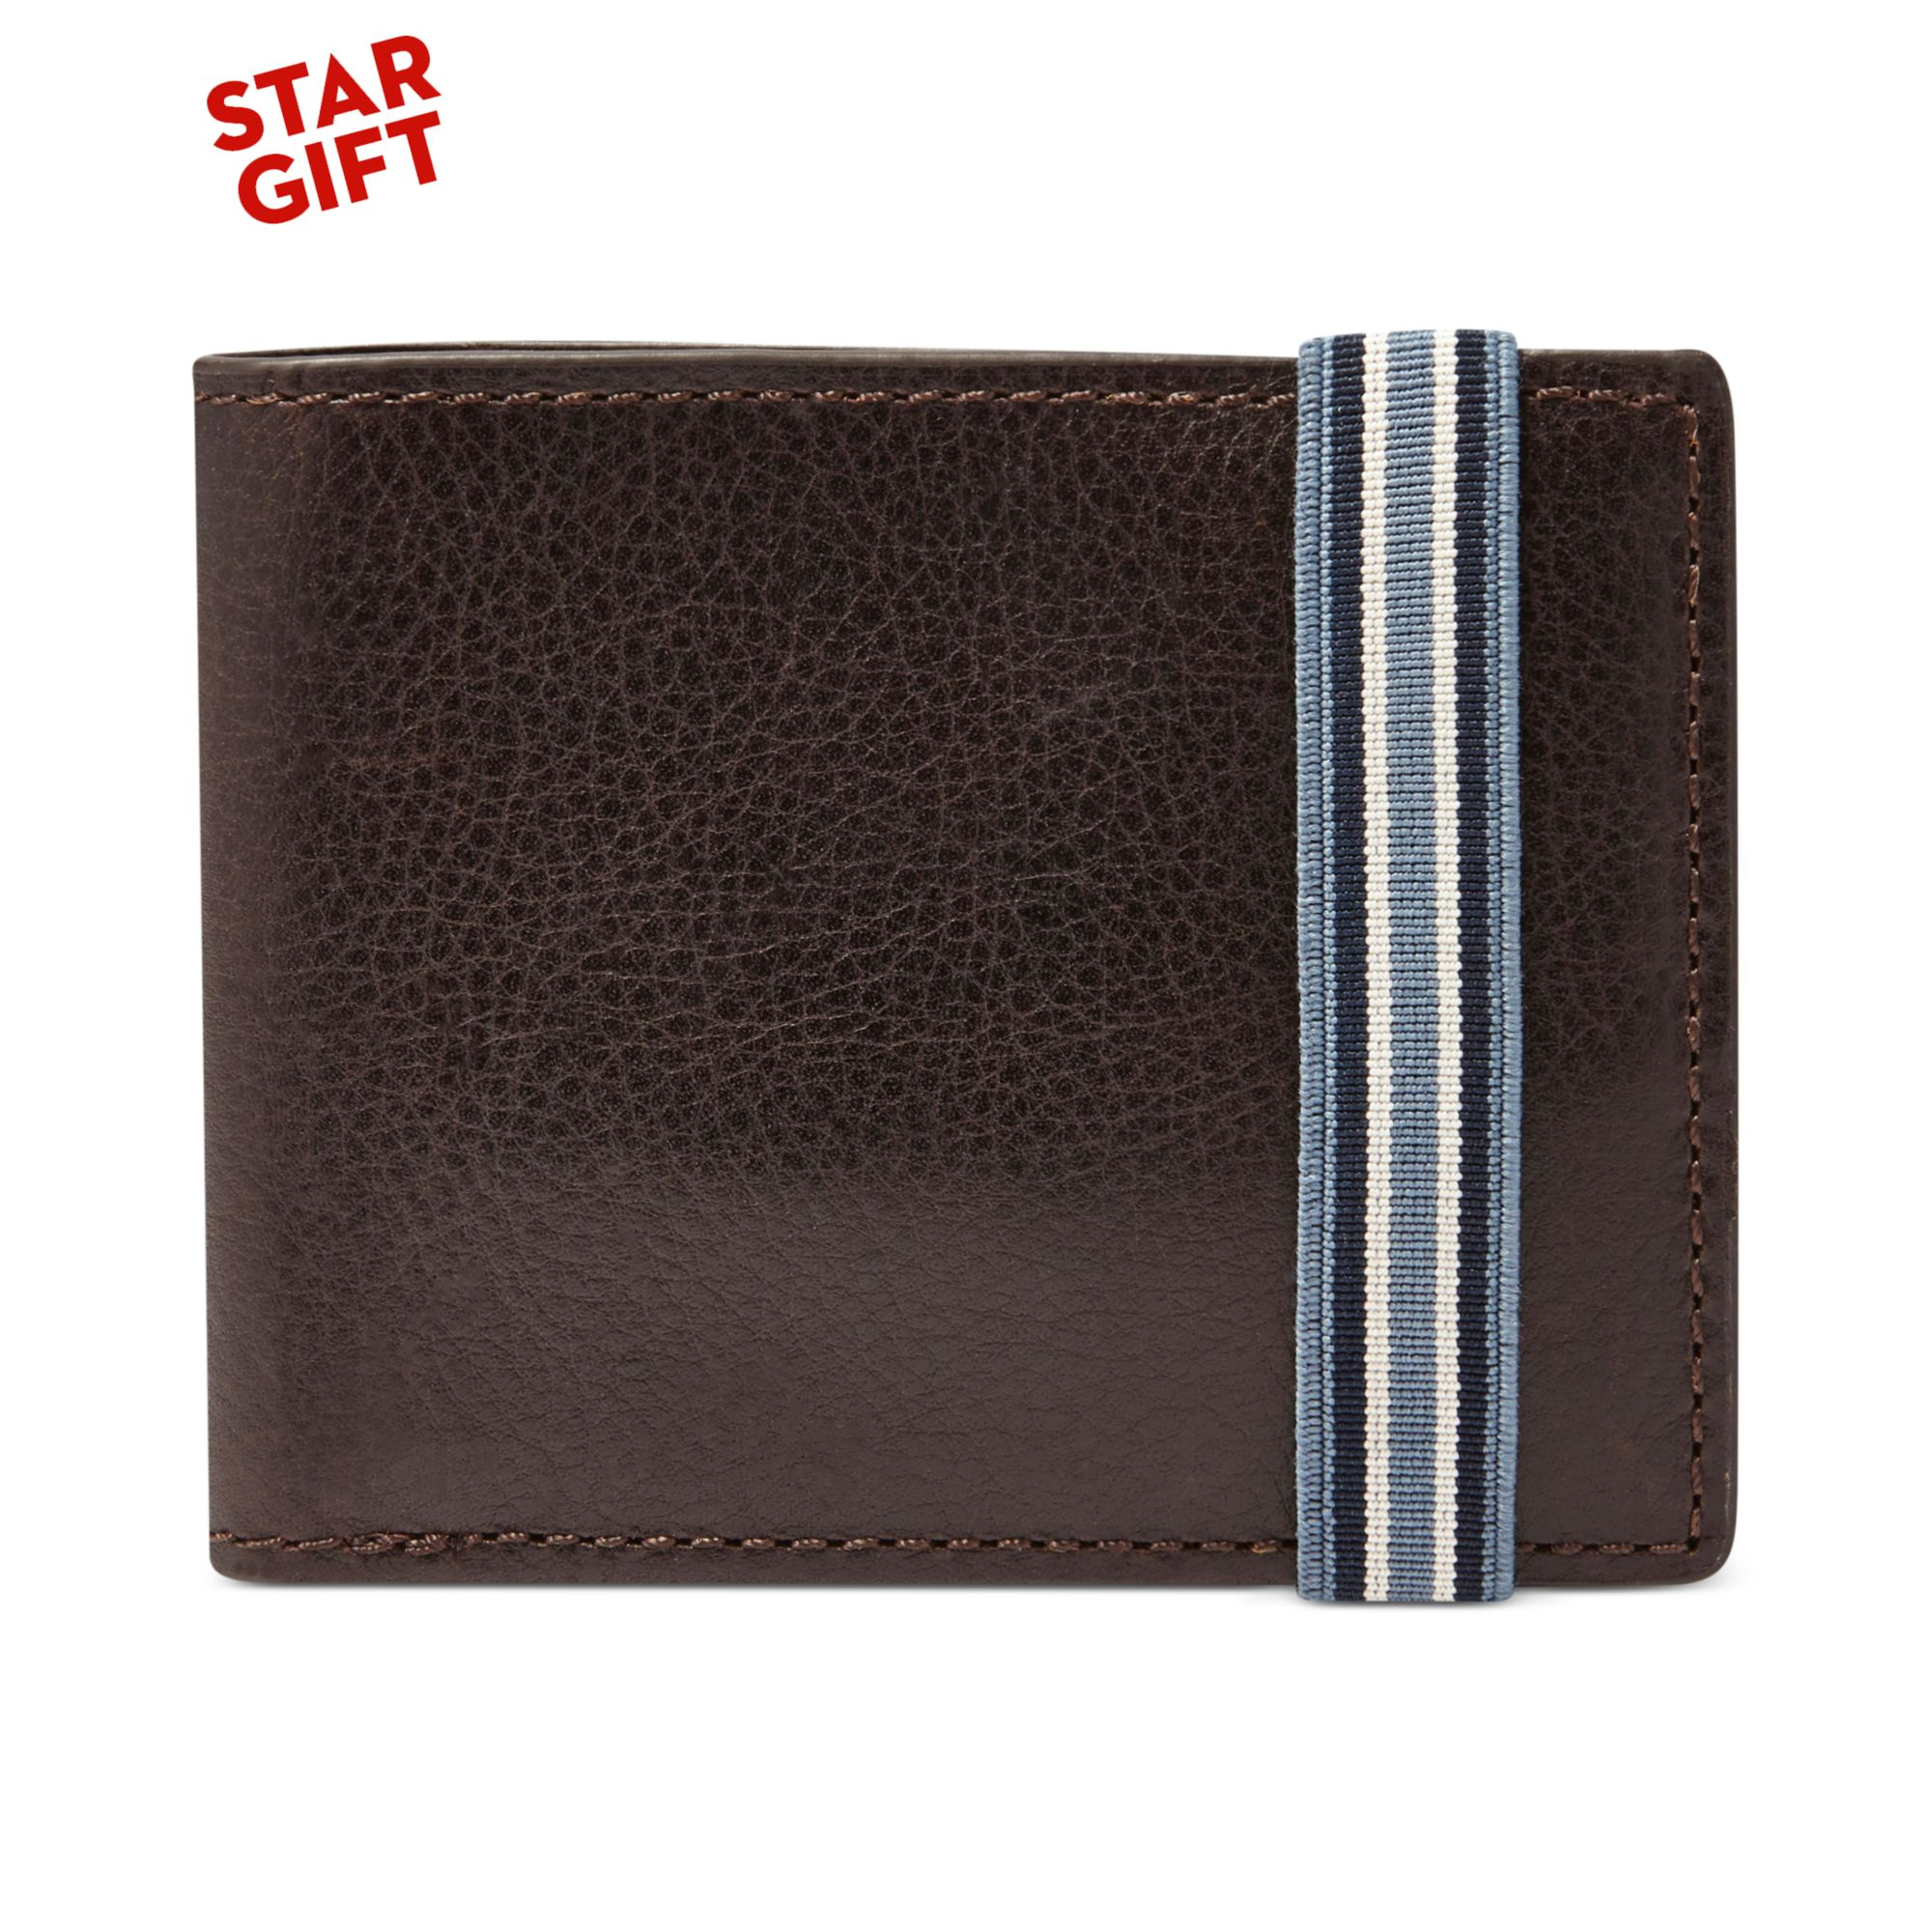 Fossil Aric Bifold Wallet in Blue for Men